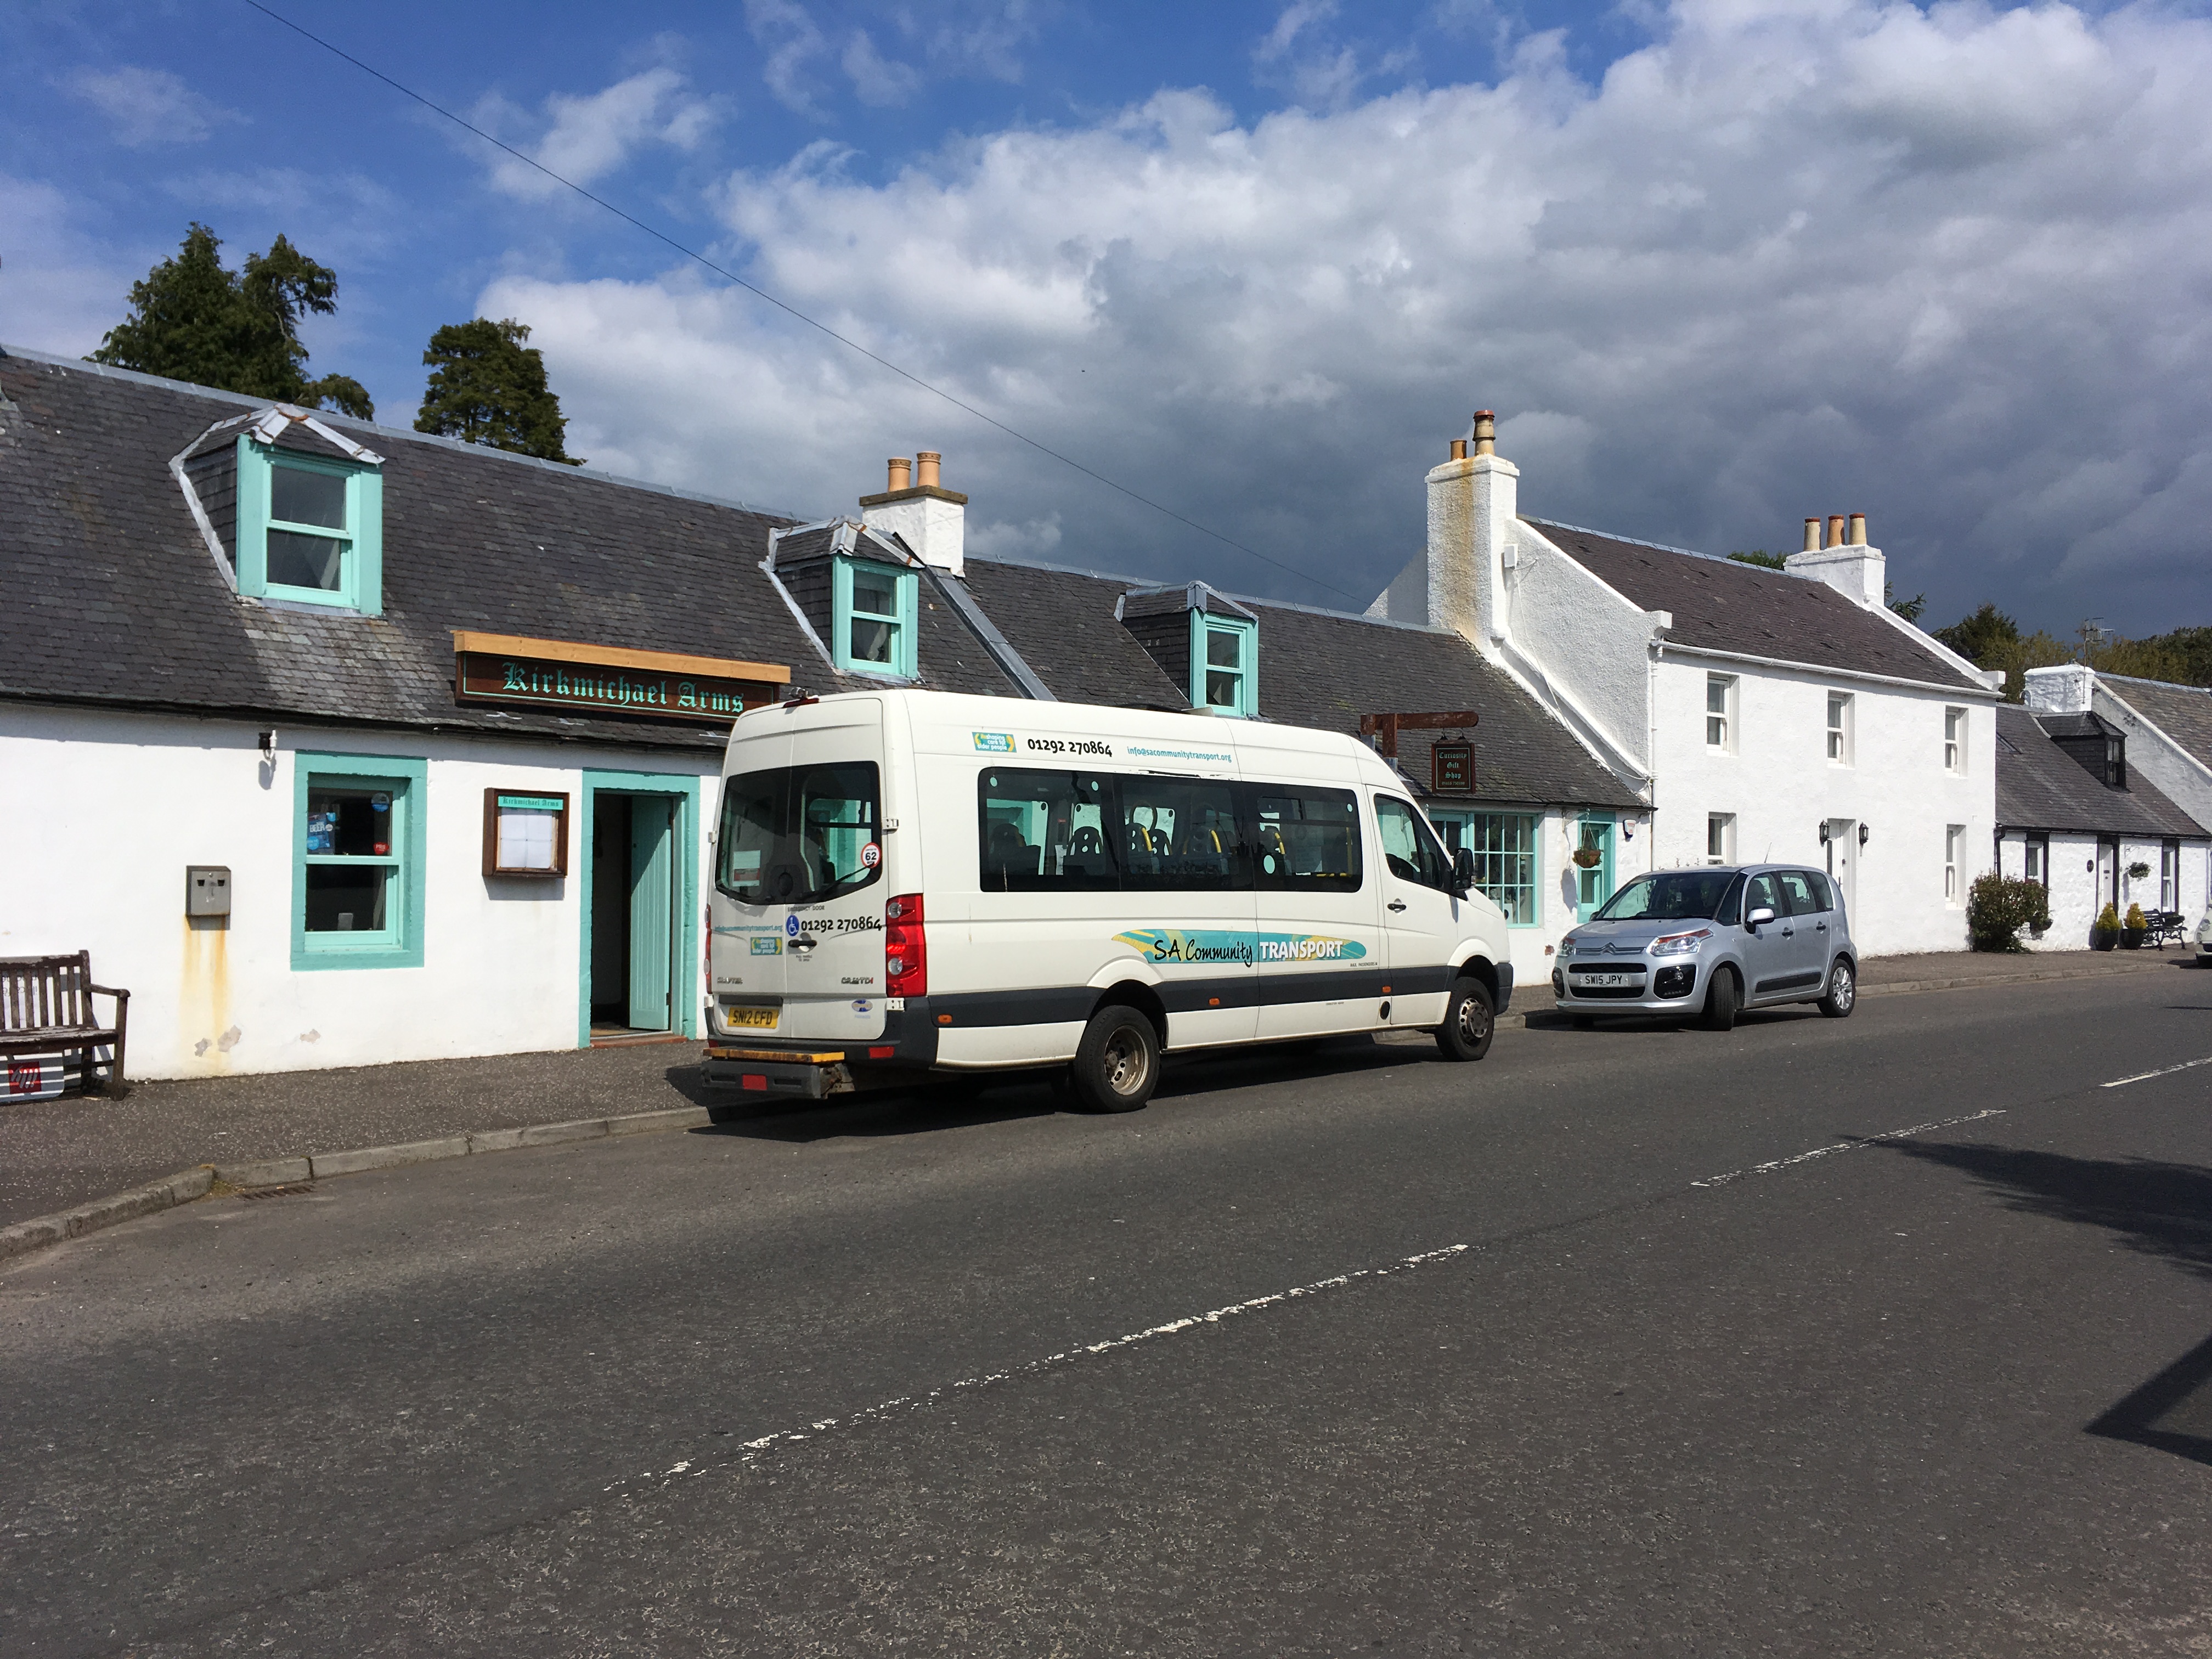 South AyrshireCommunity Transports SACT3 VW Crafter sits on a road outside a restaurant.